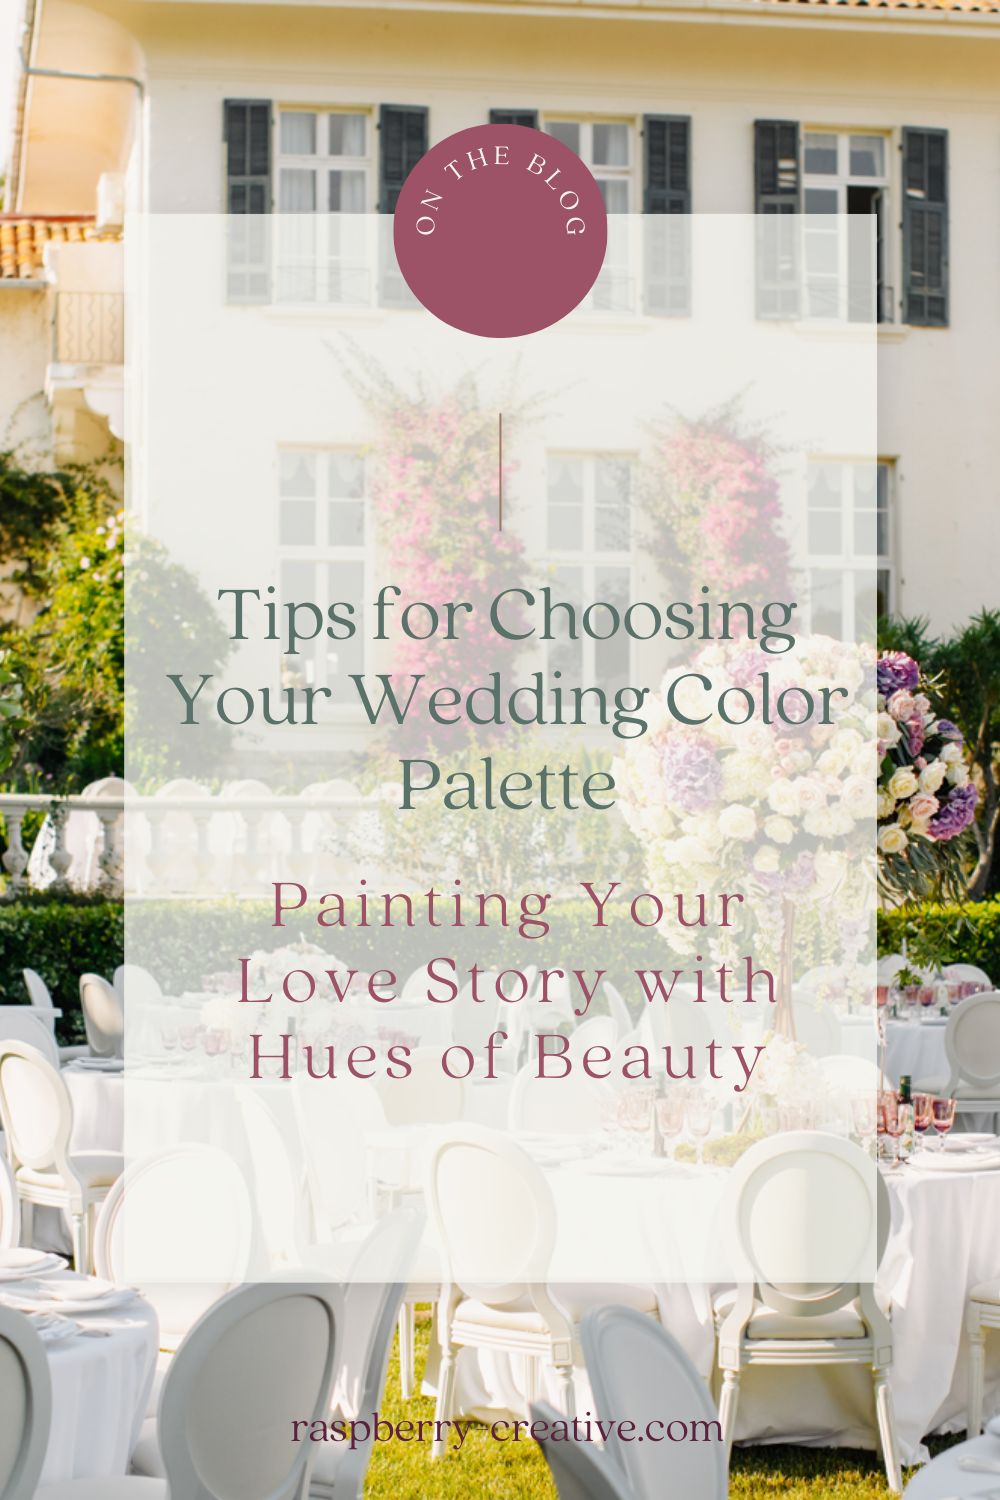 Tips for Choosing Your Wedding Color Palette